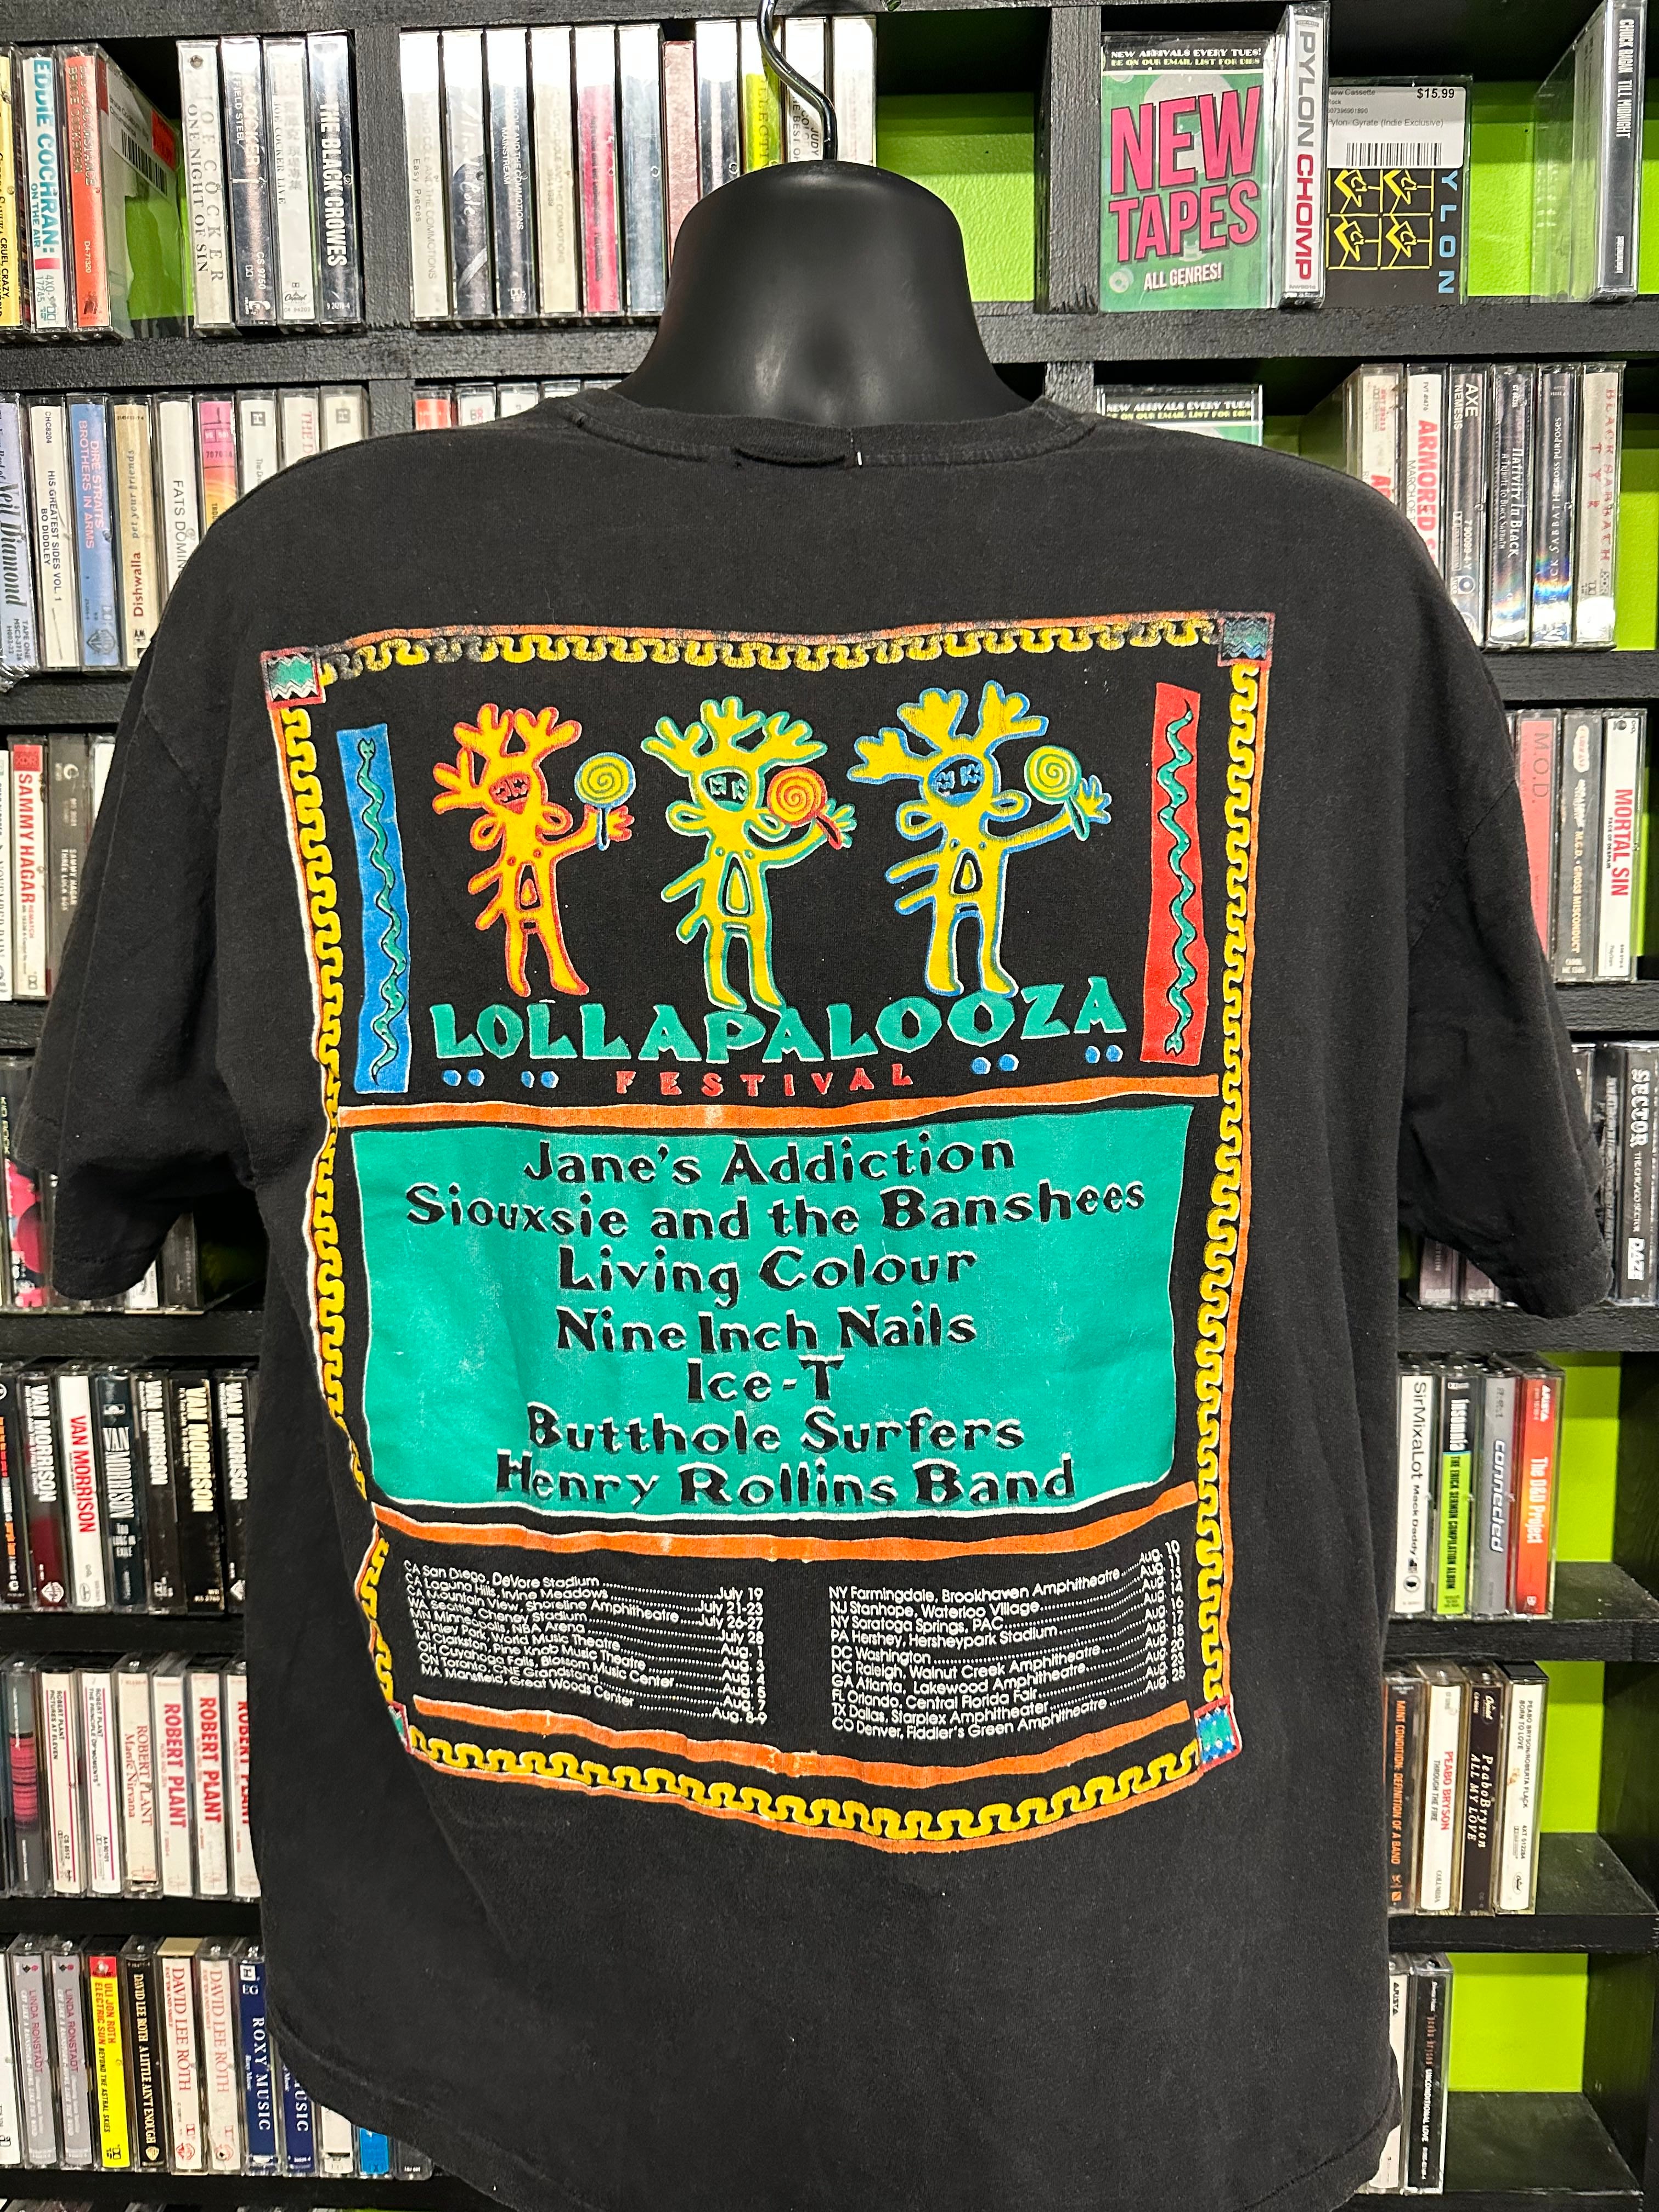 Lollapalooza 1991 Event T-Shirt, Blk, Tagless, Wide M (Measures 26” Long, 20” Pit To Pit)